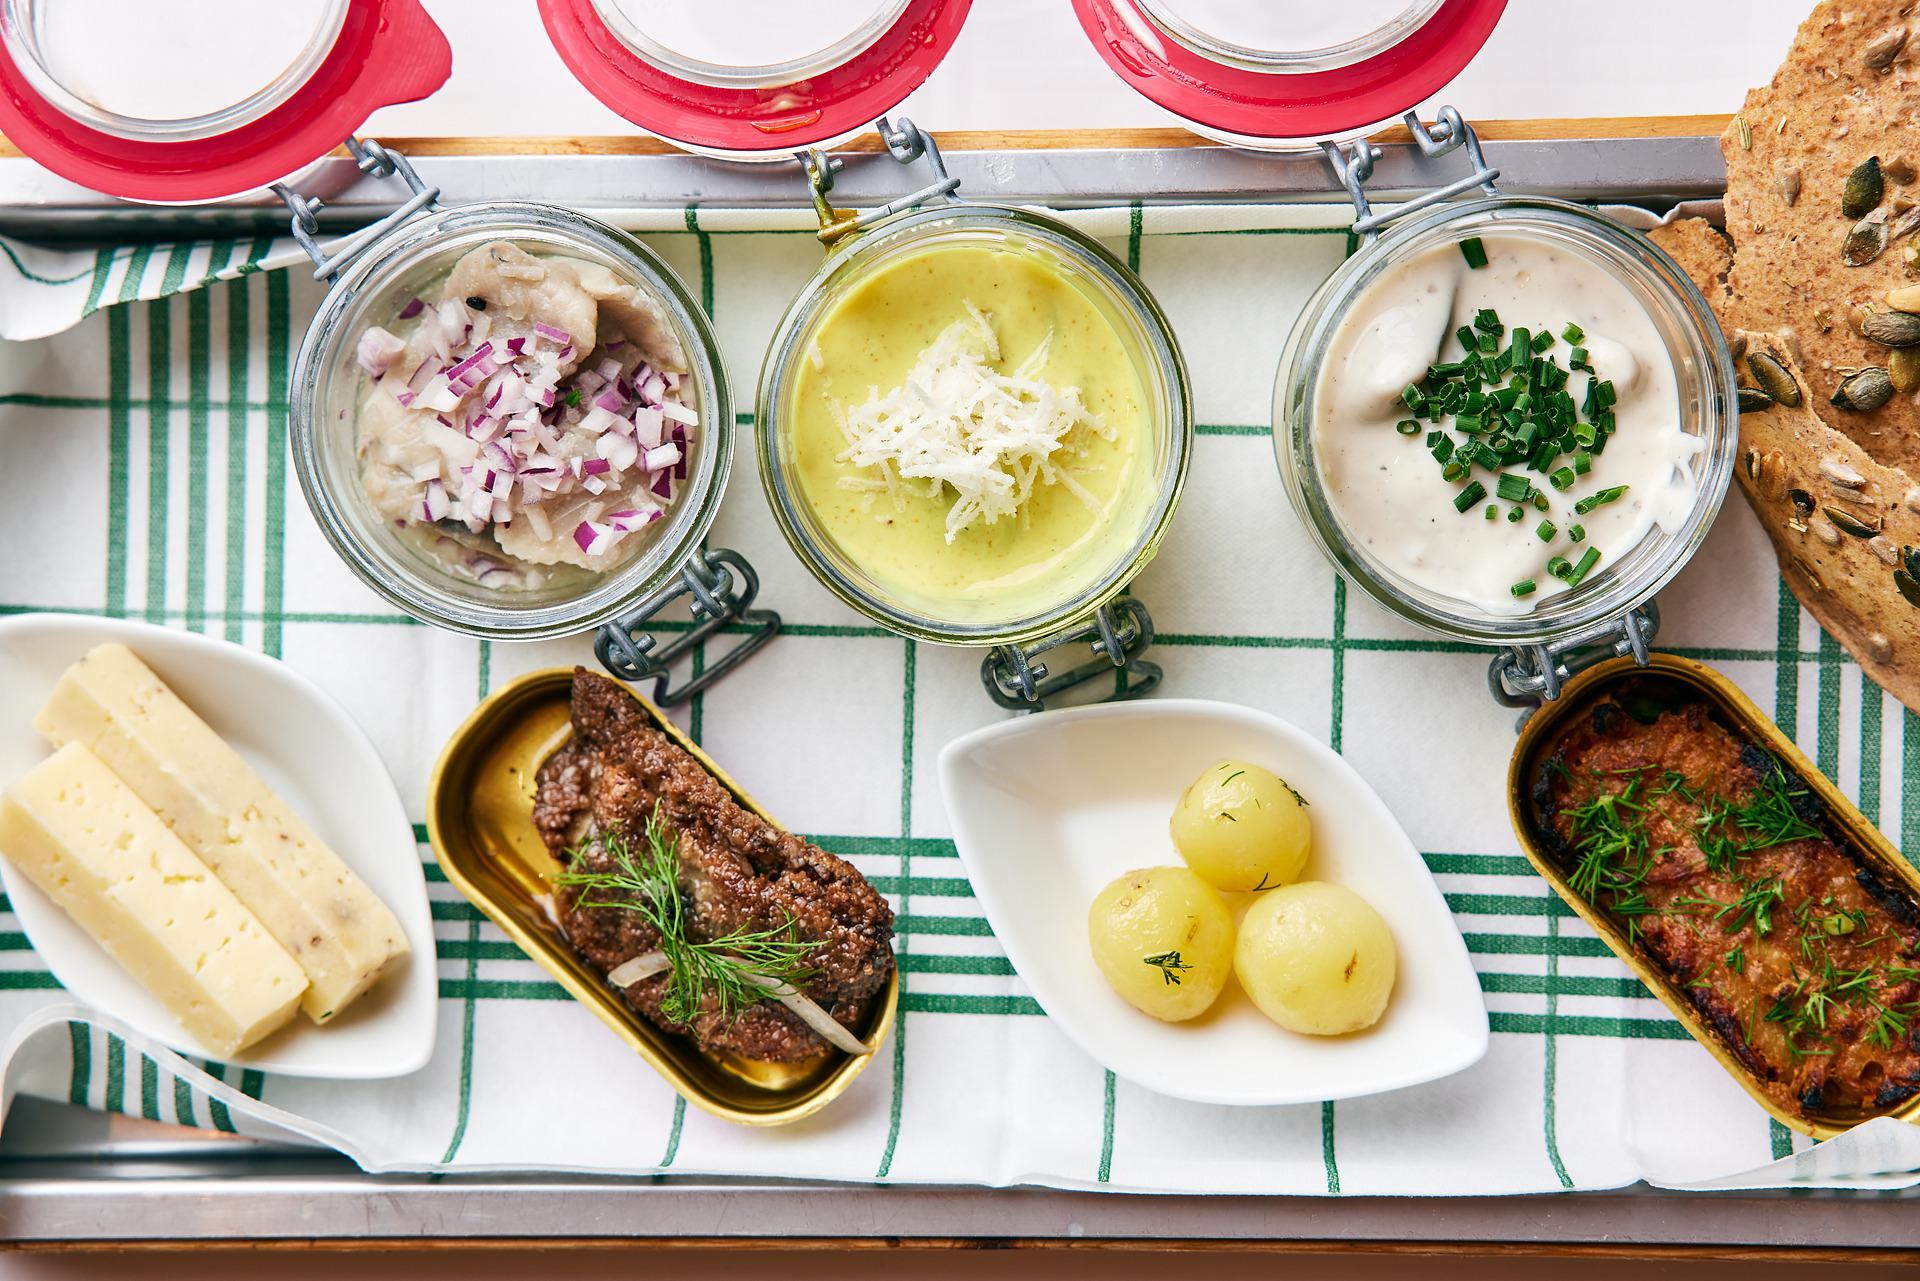 Small bowls of potatoes, herring, meat and cheese, photographed from above.